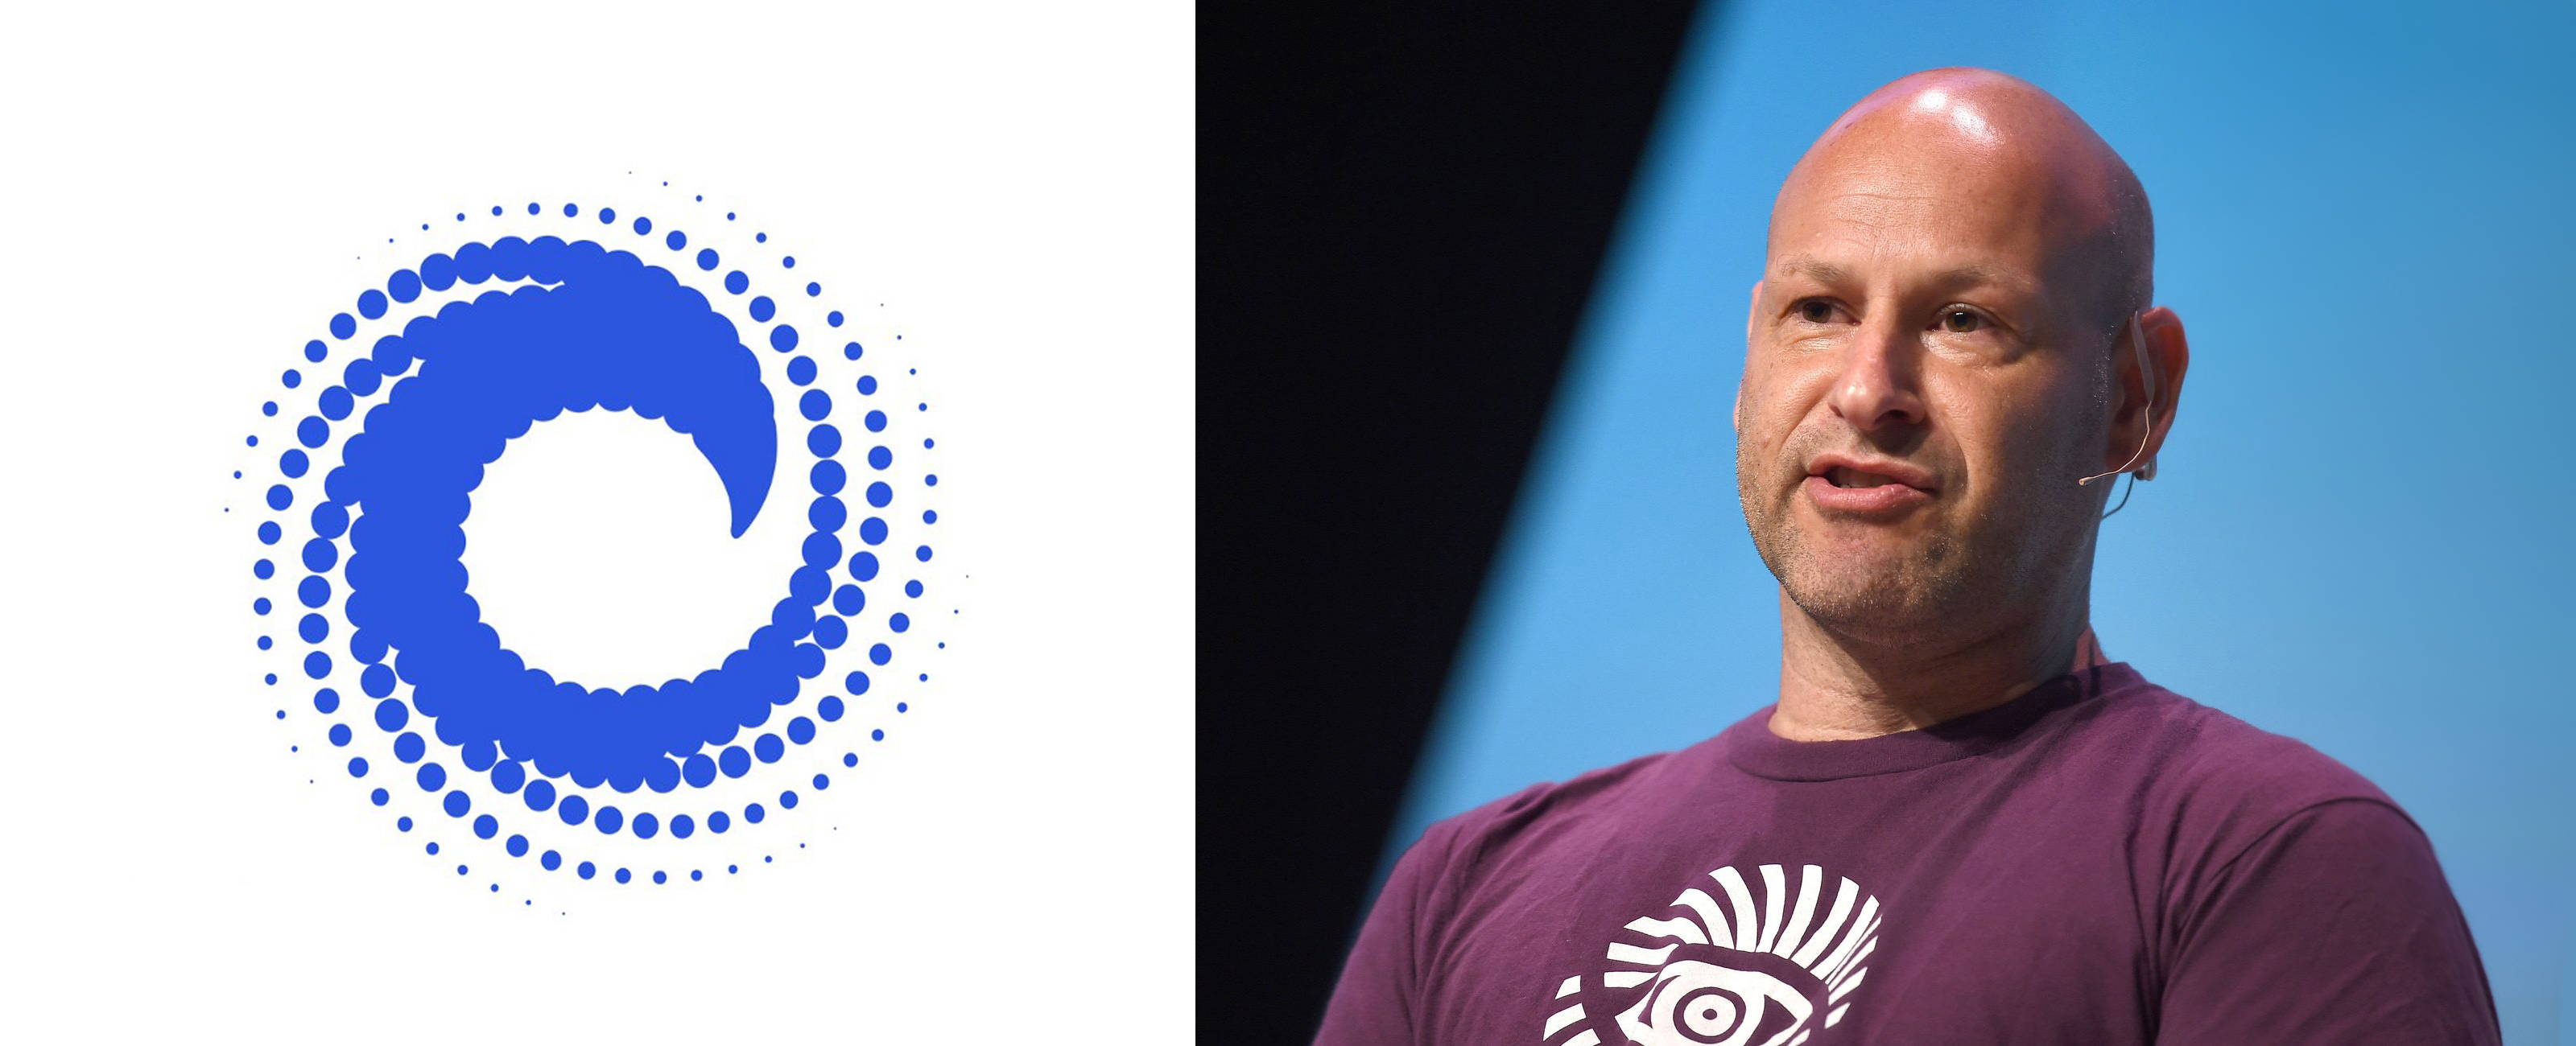 Consensys Inner Conflicts Spark Legal Action Against Founder